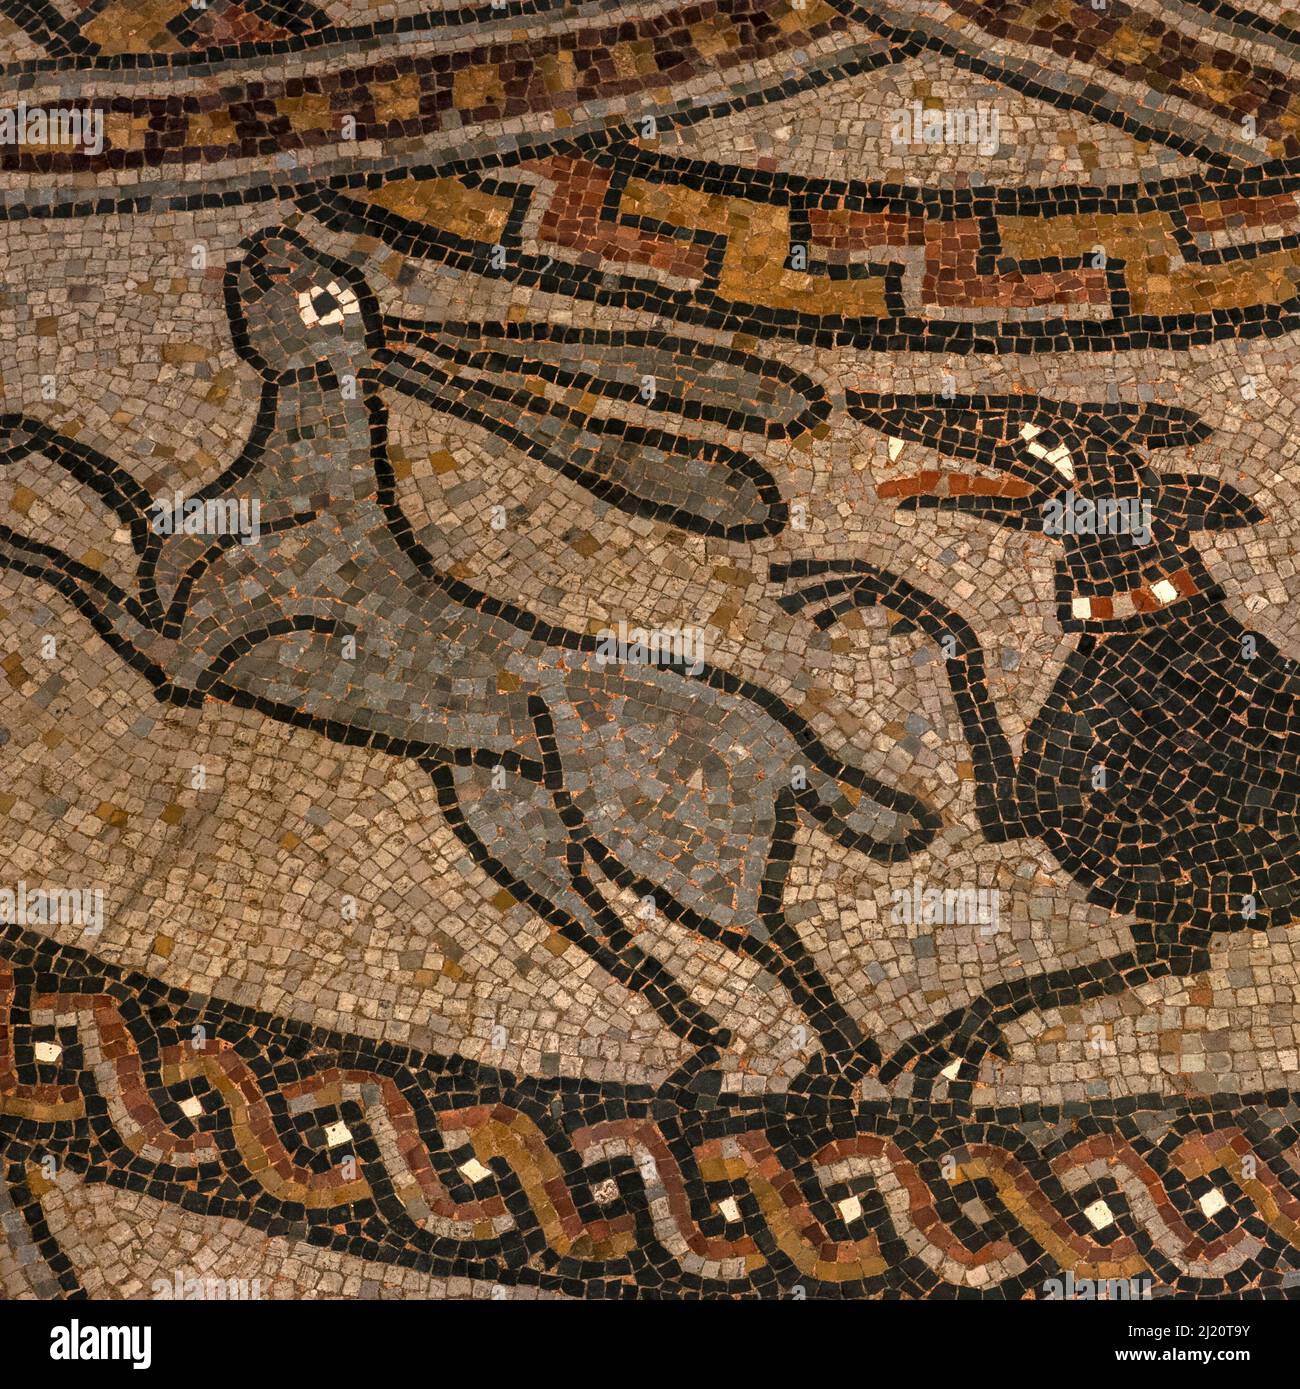 Black hound pursues leaping grey hare.  Detail of medieval mosaic in restored late-1000s or early 1100s pavement in former Benedictine abbey church at Sorde l'Abbaye, Landes, Nouvelle-Aquitaine, France. Stock Photo